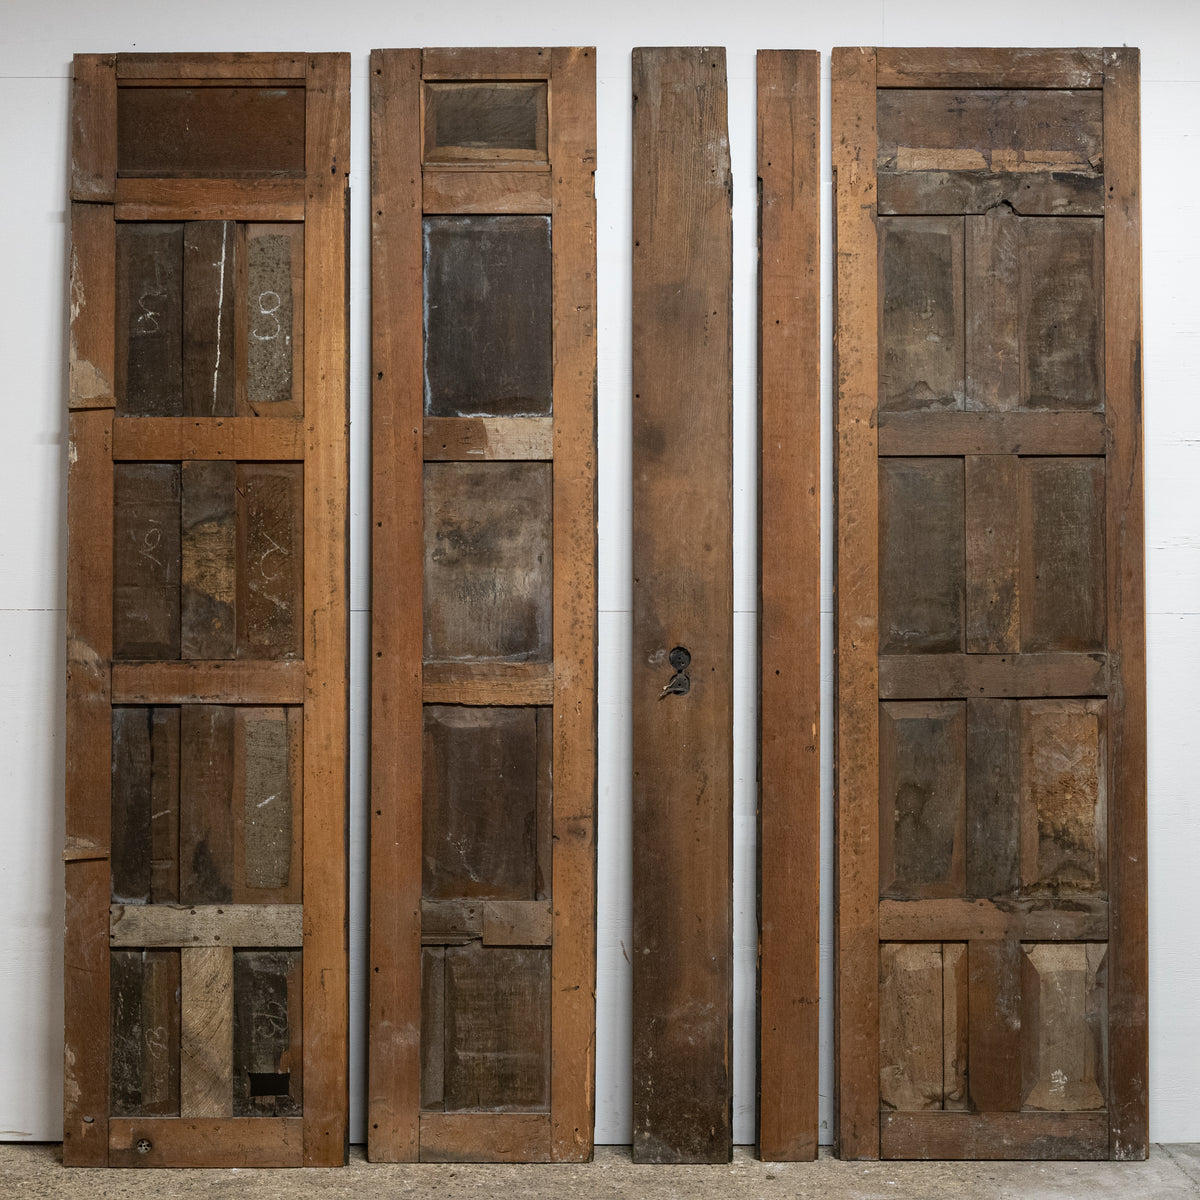 Antique Late 17th Early 18th Century Beaded Oak Panels | The Architectural Forum